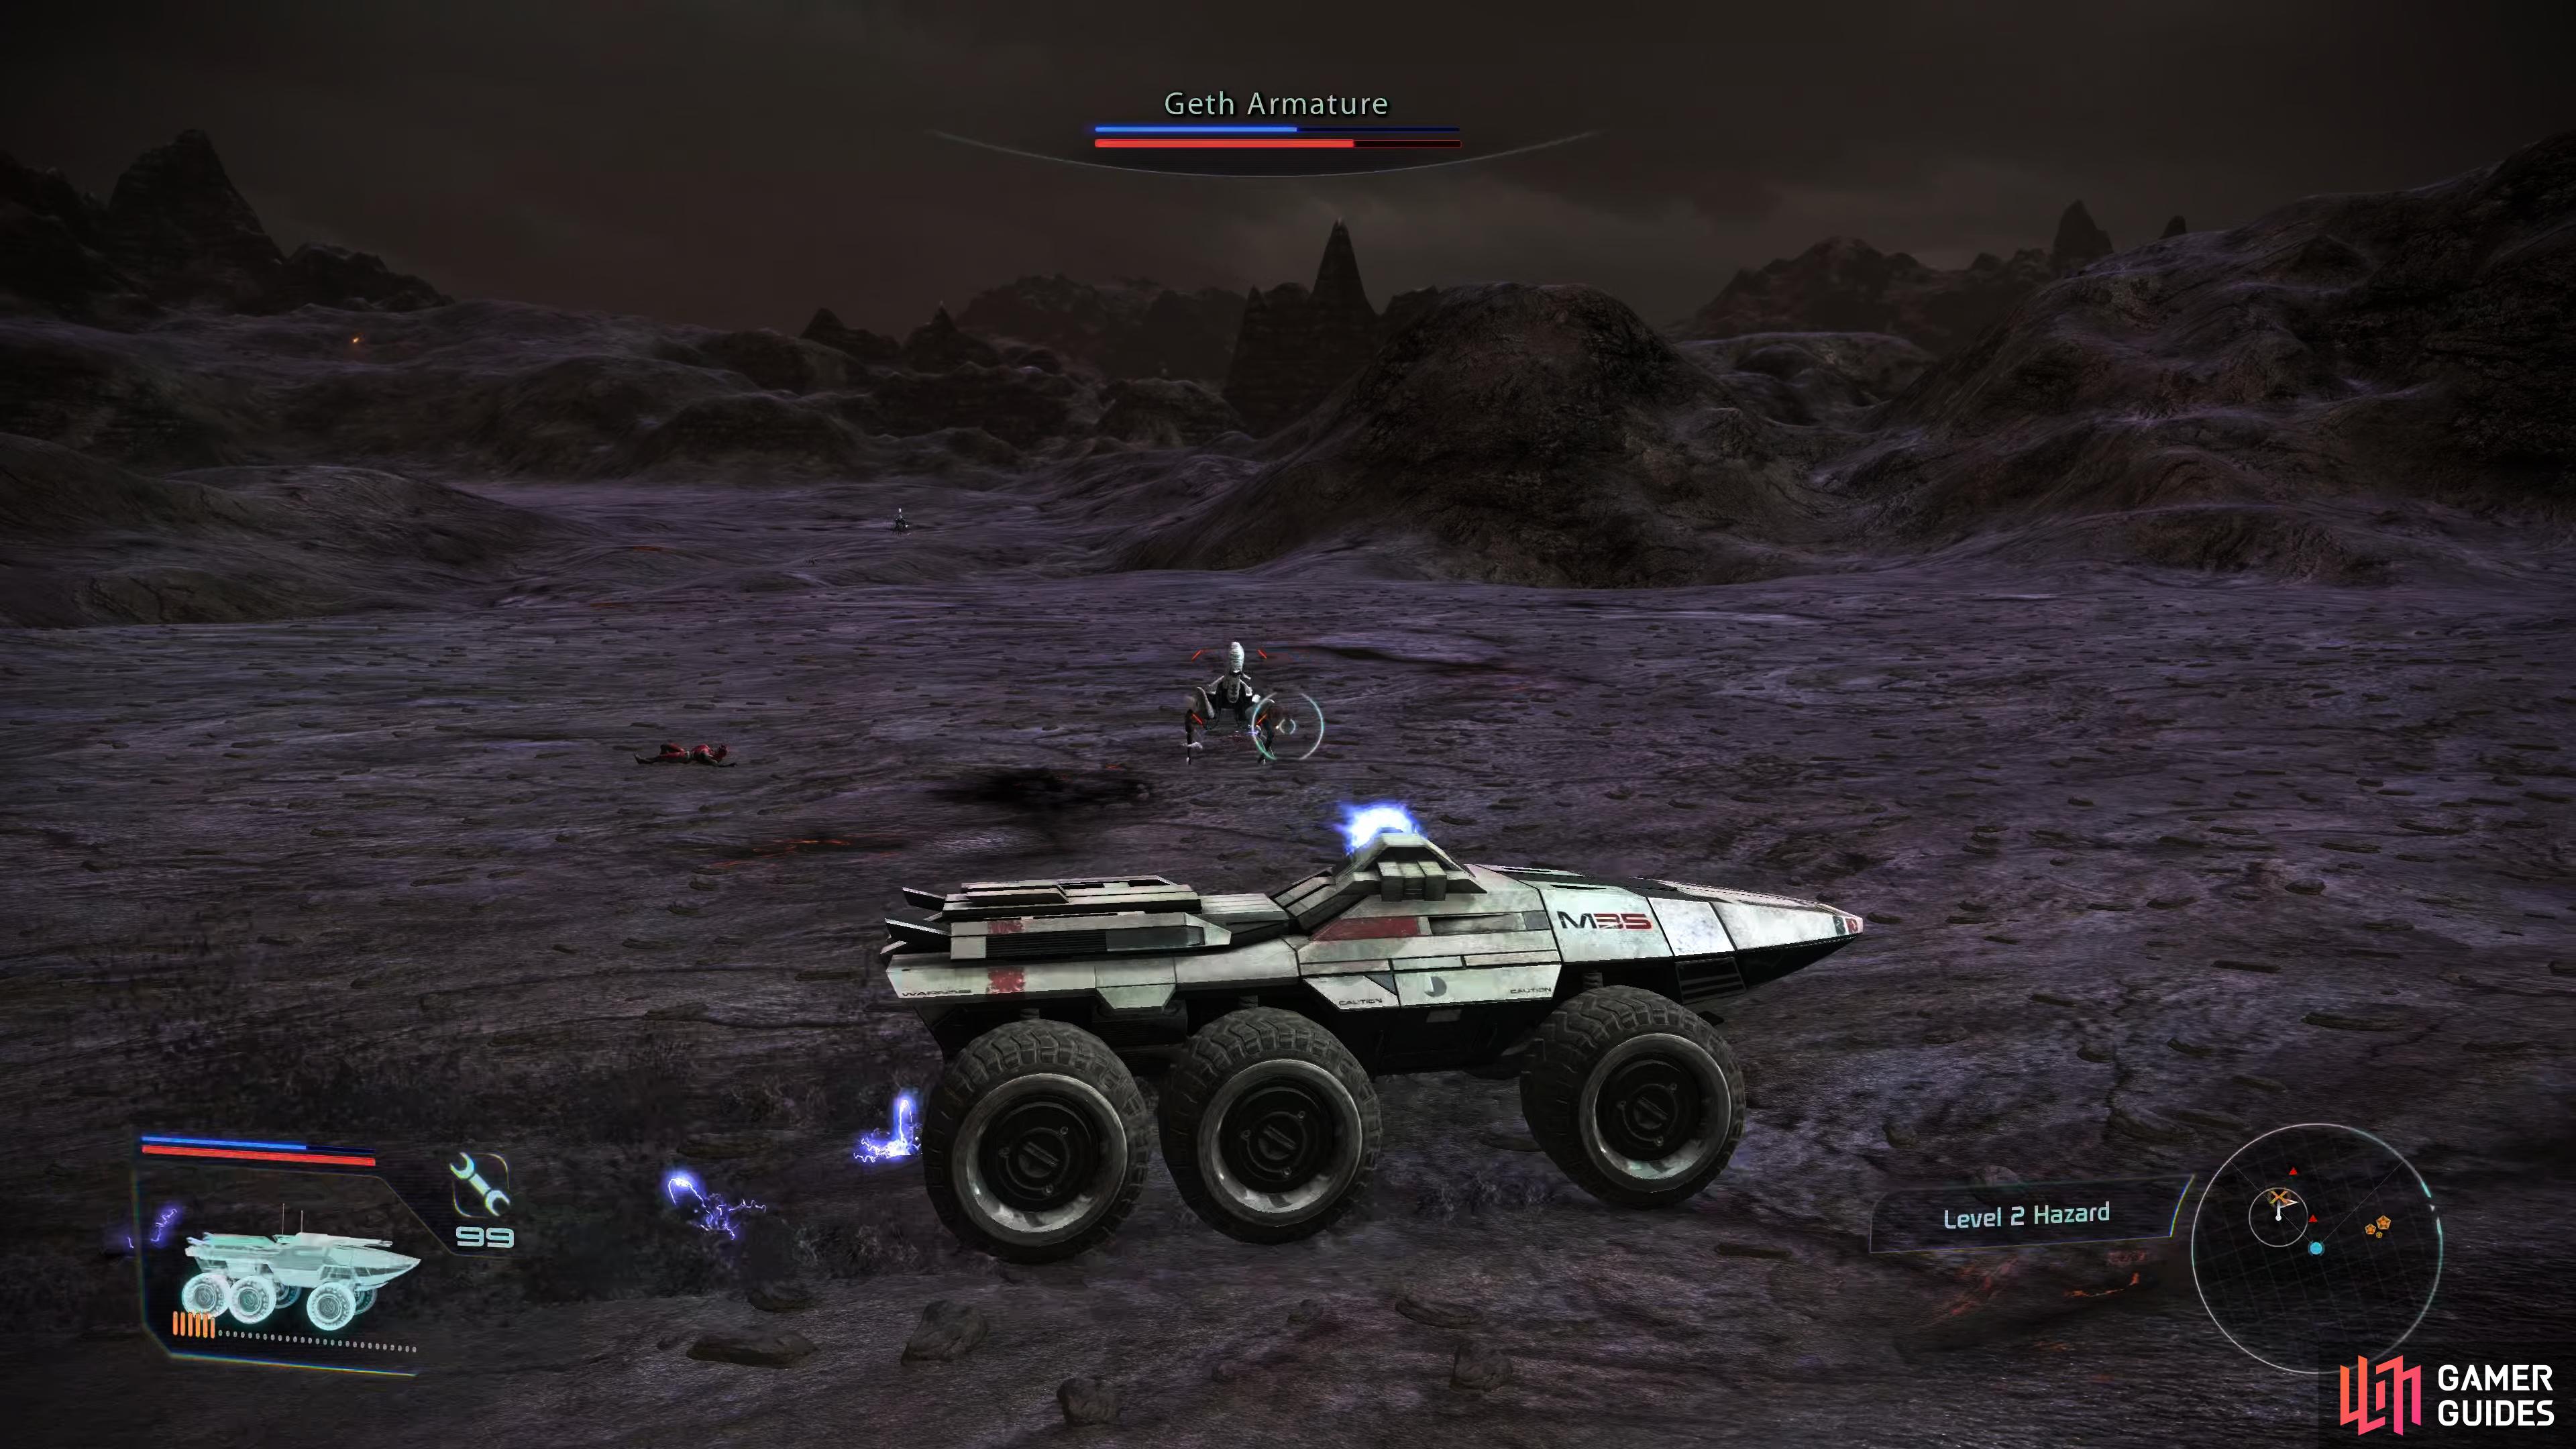 then use the main cannon while staying on the move against the Geth Armatures.